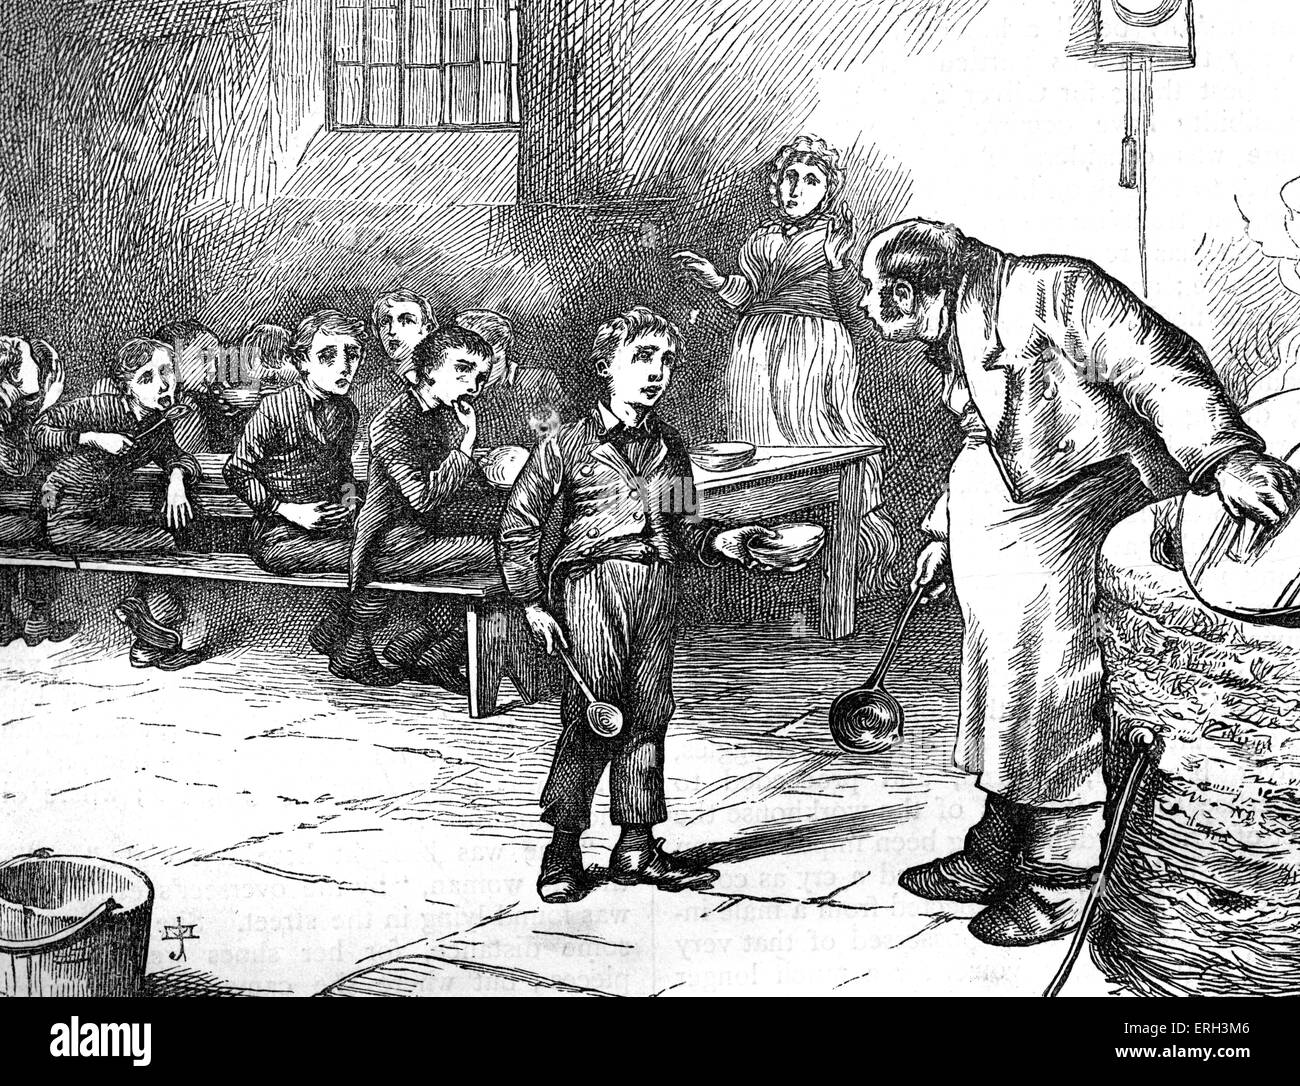 Charles Dickens's ' The Adventures of Oliver Twist ', first published 1838.  Description of scene: Oliver asks the master of the workhouse for more  food. Chapter One. Illustration by J. Mahoney 1816-1879.